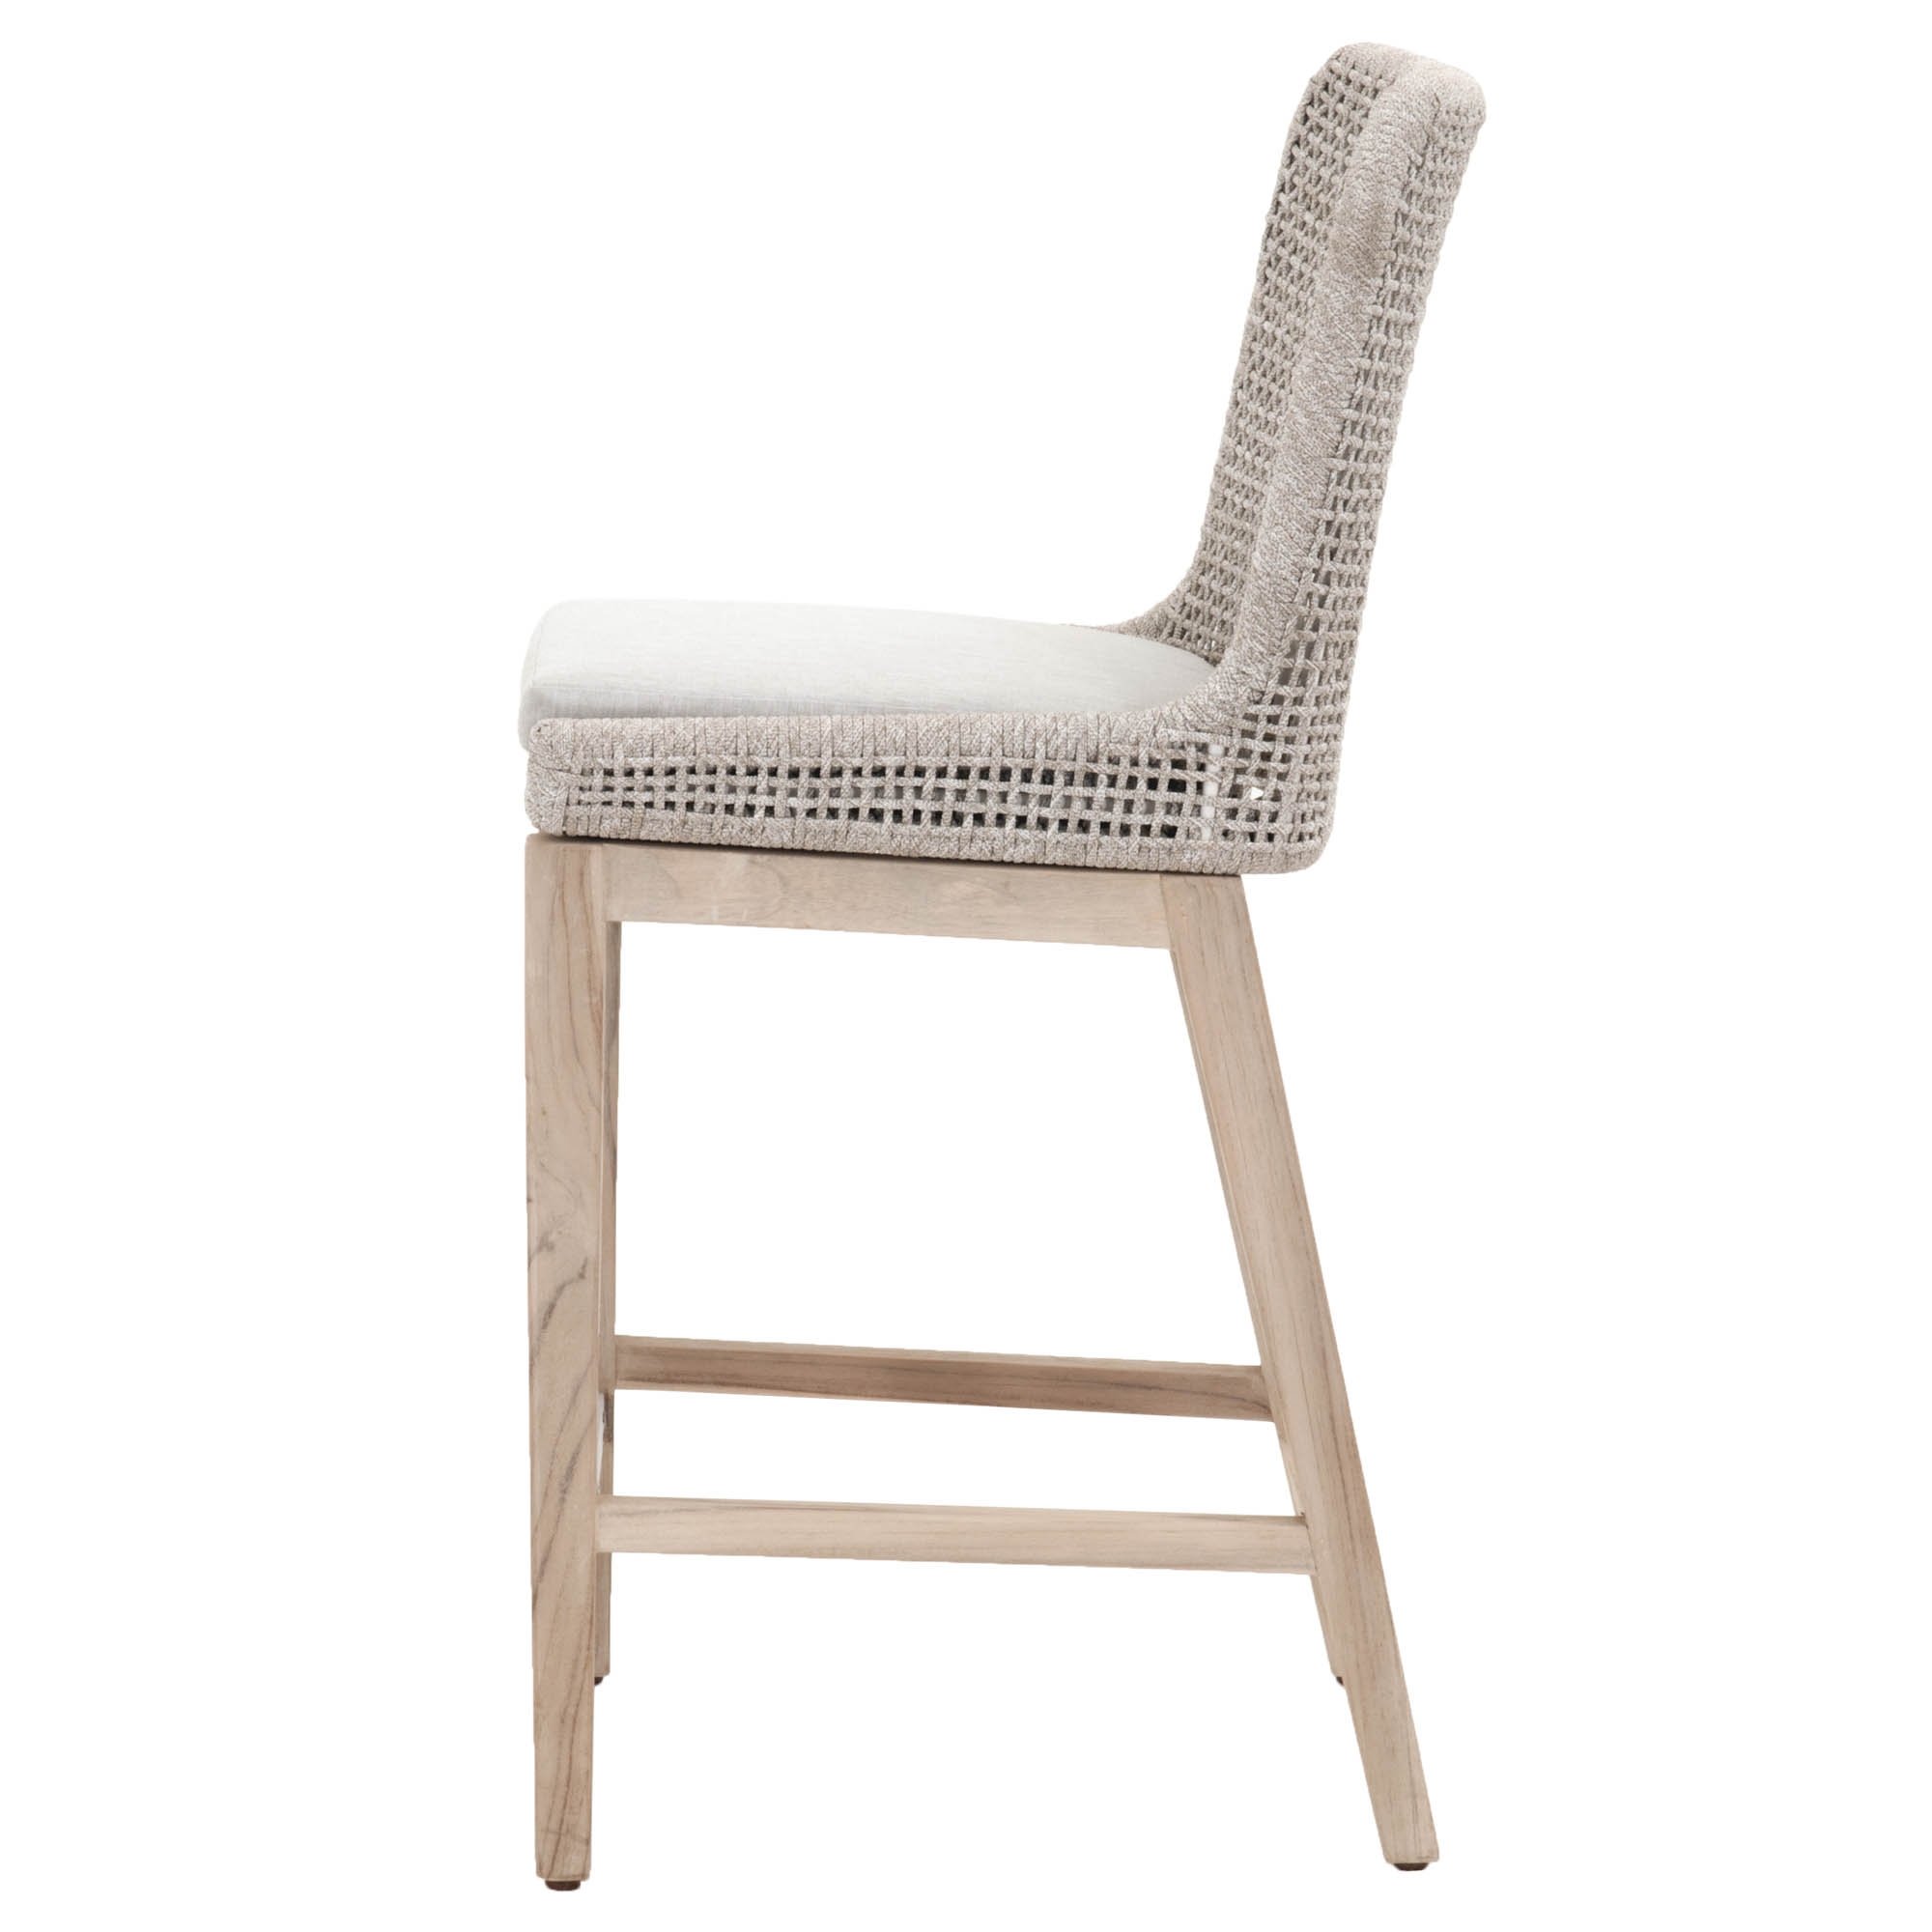 Winnetka Indoor/Outdoor Counter Stool, White Taupe - Image 2